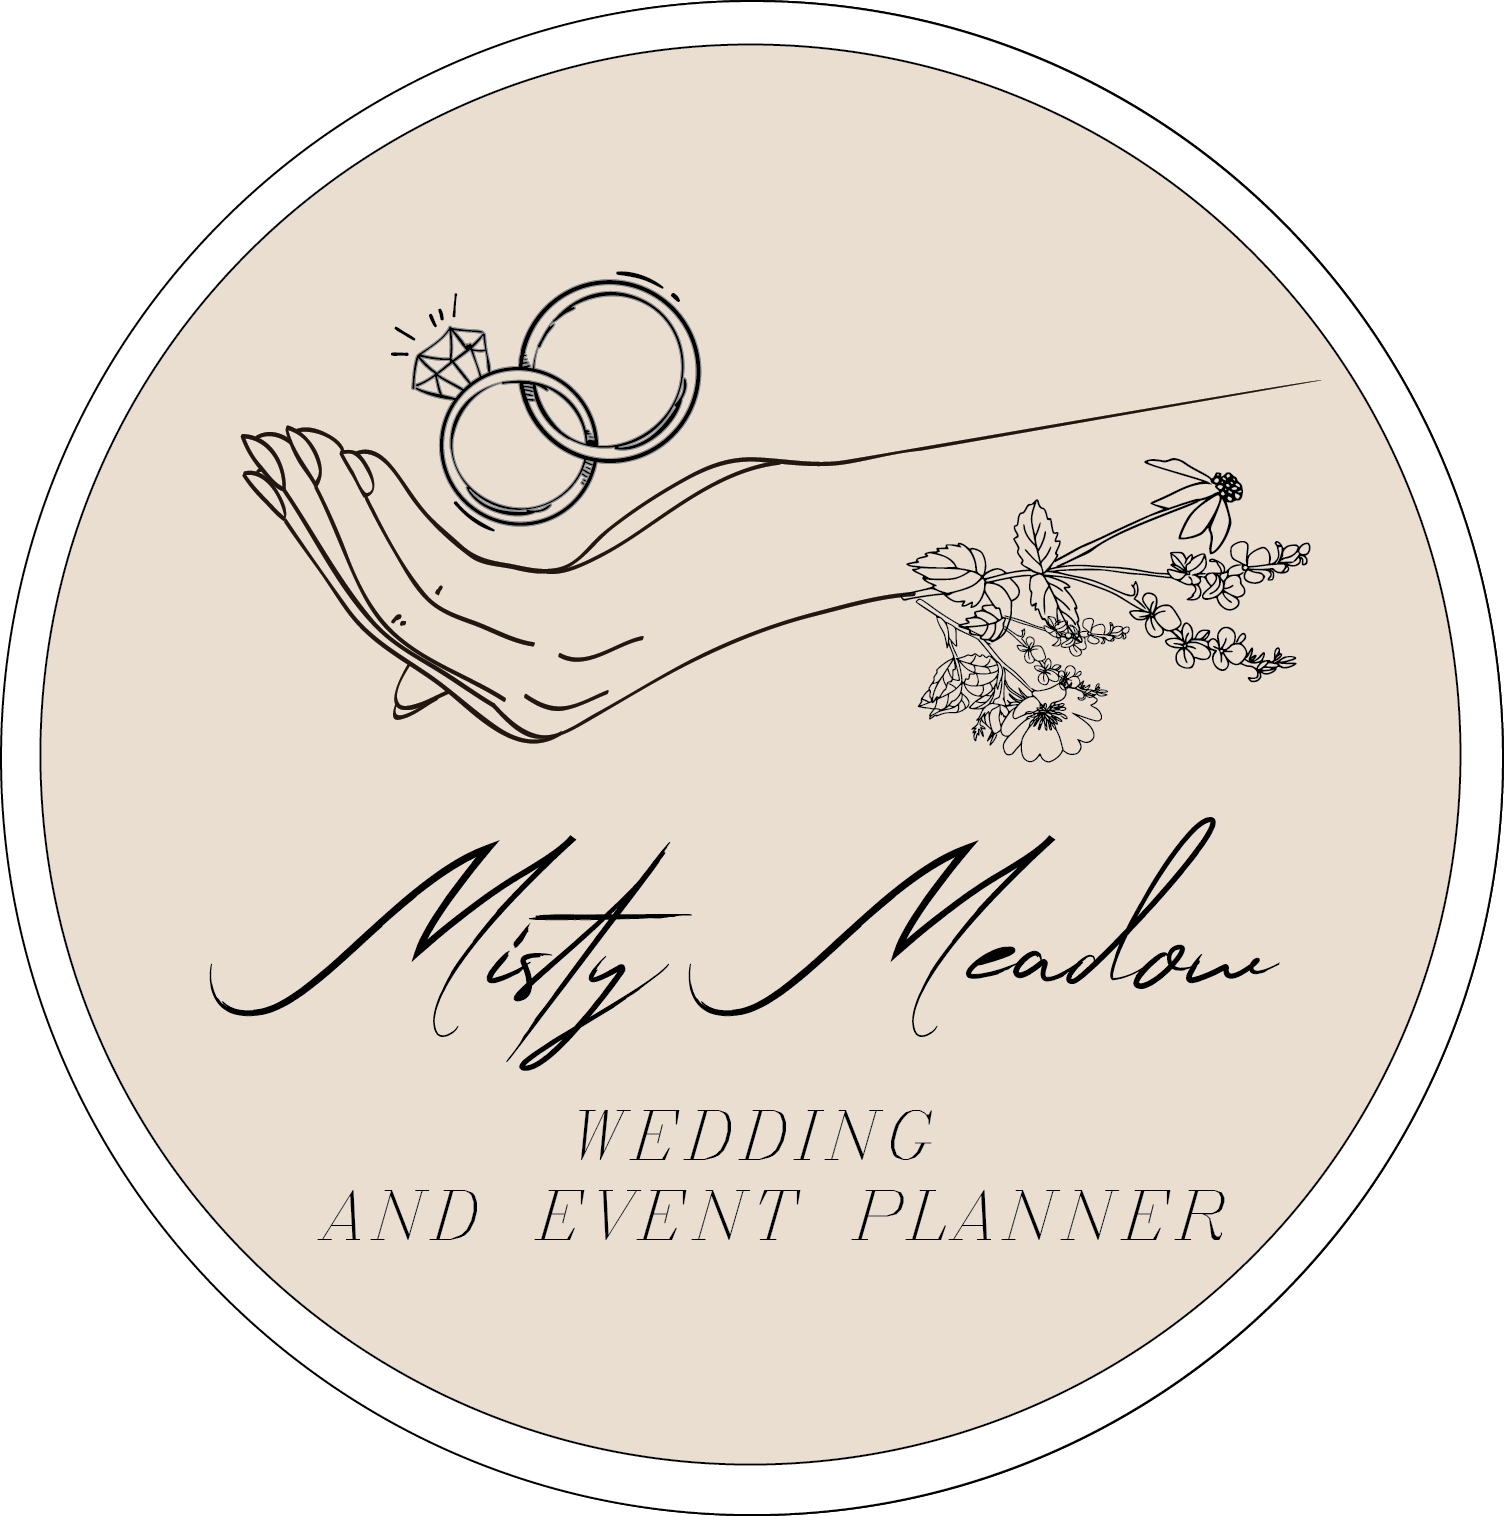 Wedding-and-event-planner